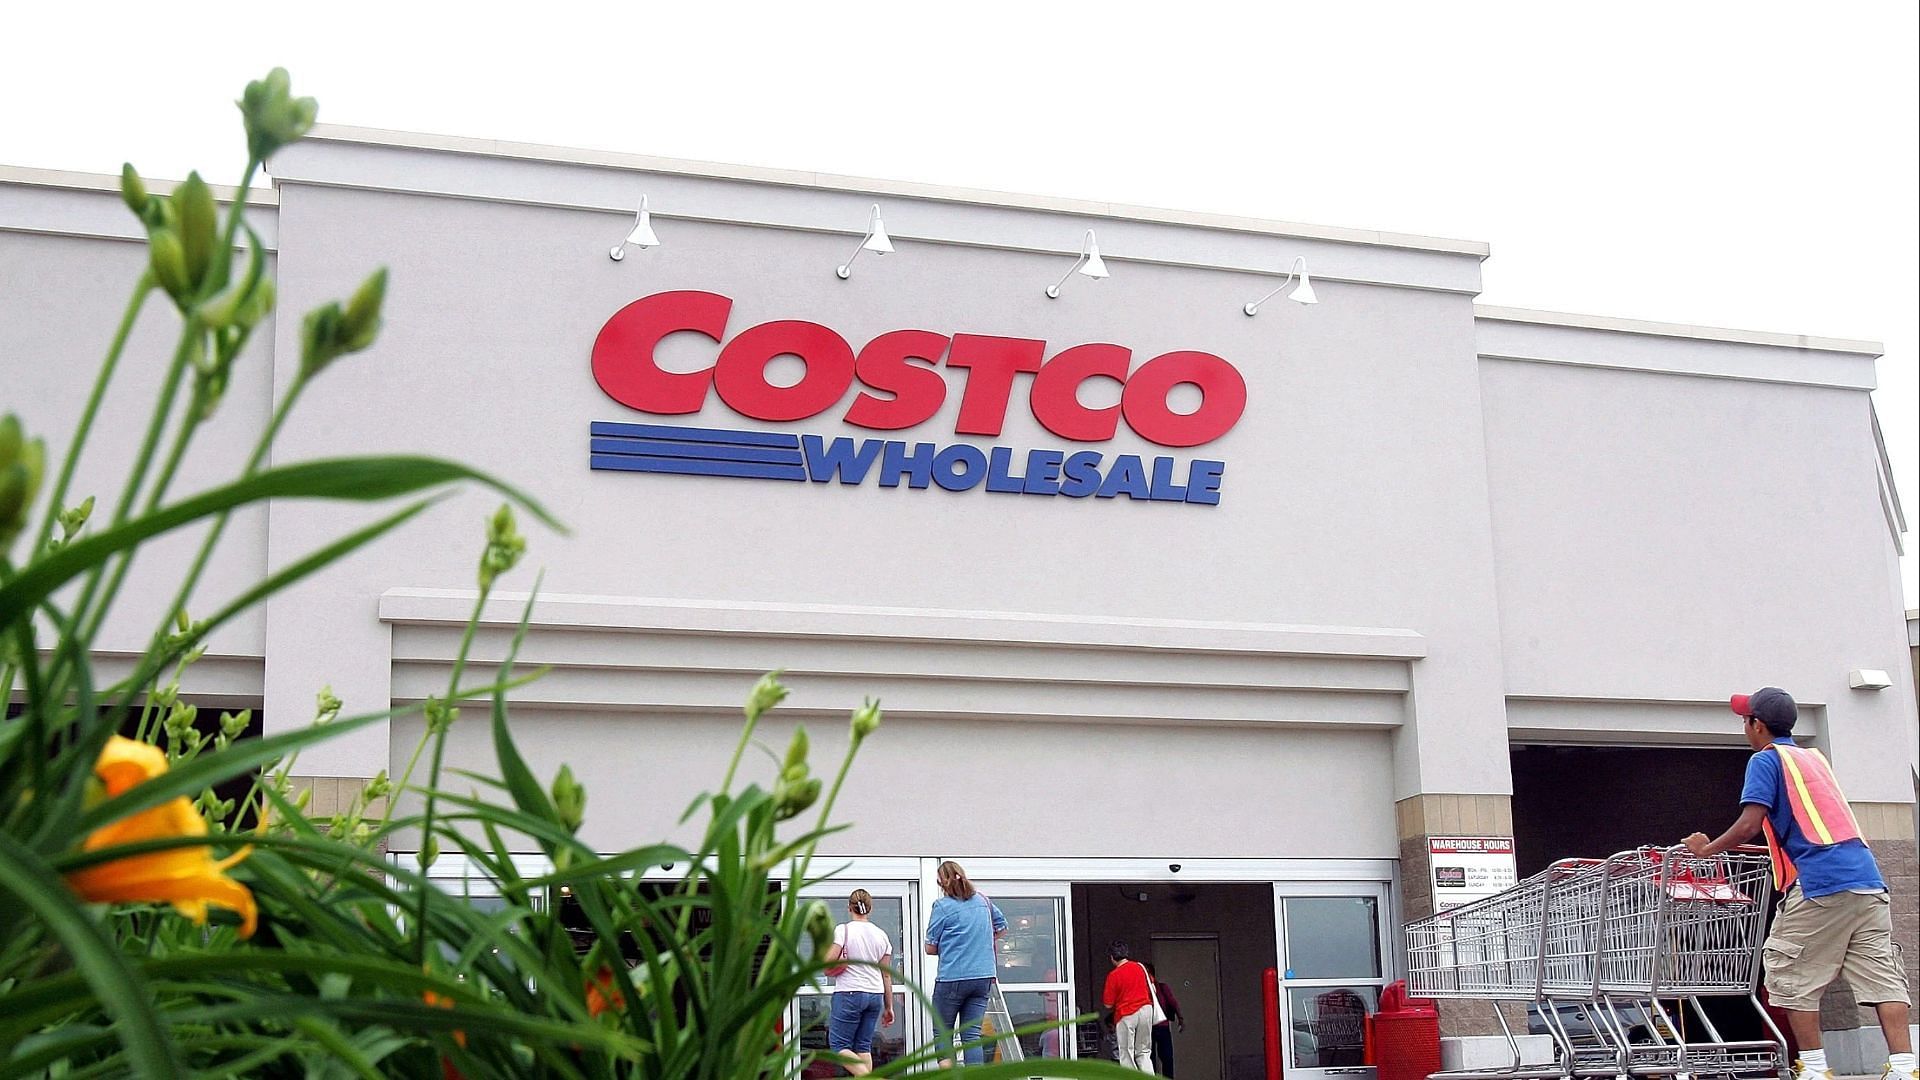 Costco is beginning to implement new sample kiosks in stores across the country (Image via Tim Boyle/Getty Images)